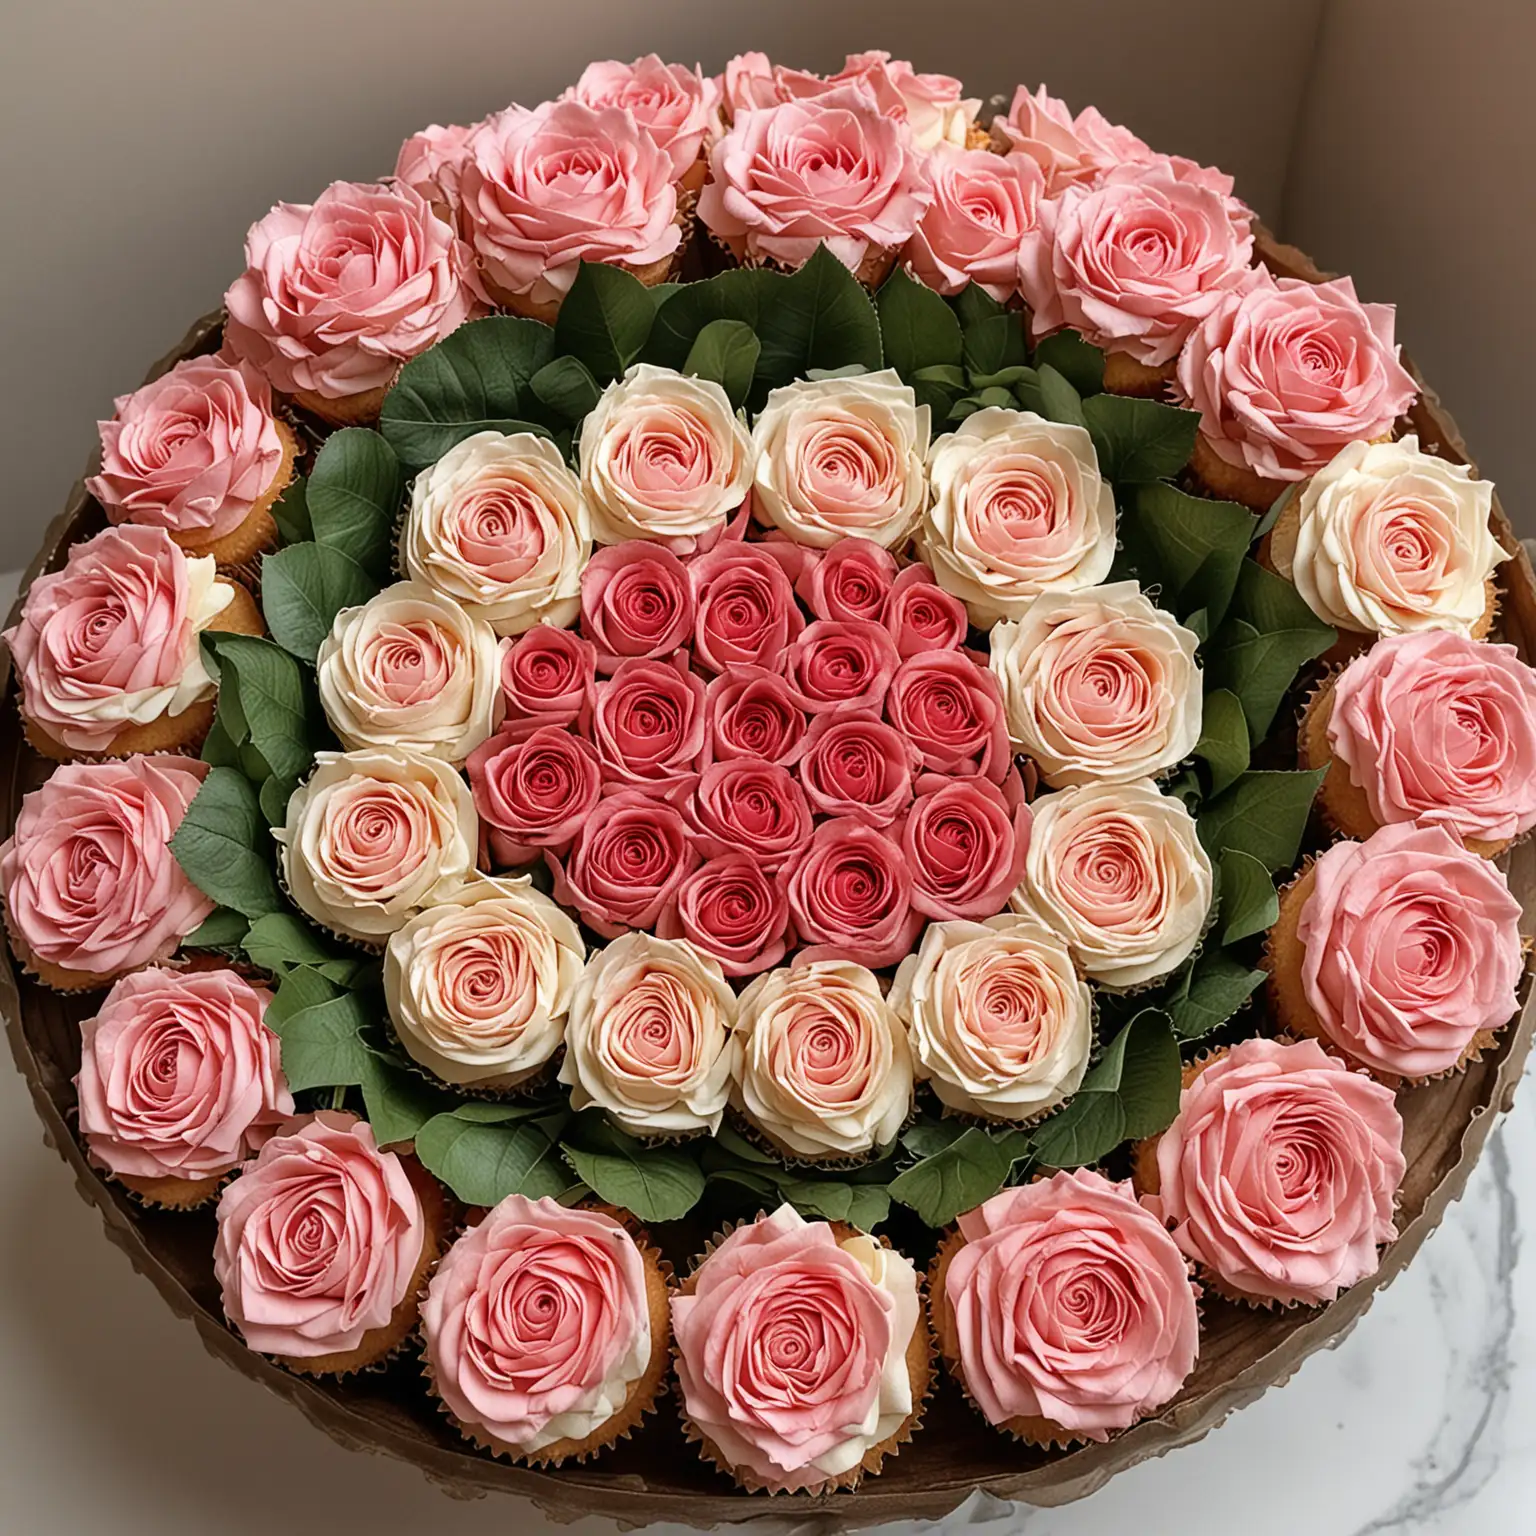 Elegant-Rose-Bouquet-Surrounded-by-Cupcakes-on-Tray